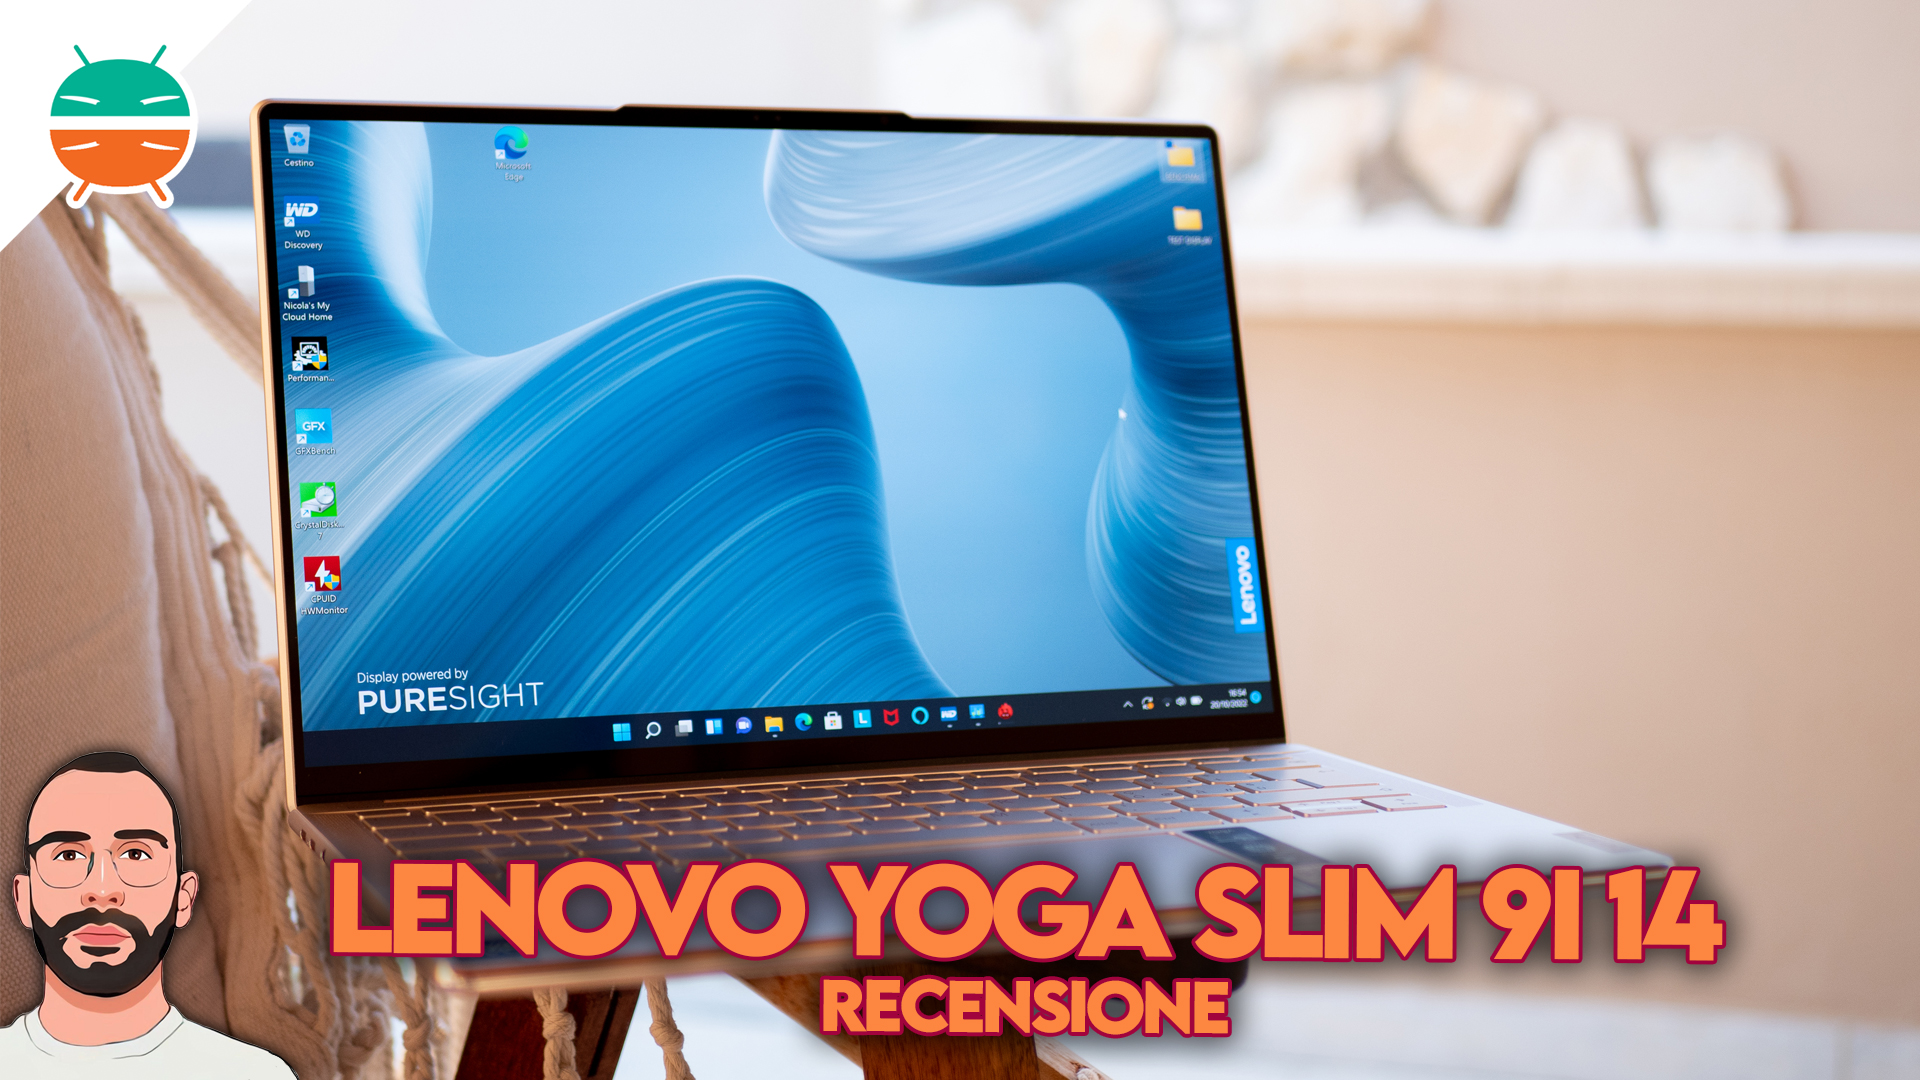 Lenovo Yoga Slim 9i 14 Review: I CHALLENGE you to find a more BEAUTIFUL  NOTEBOOK! 